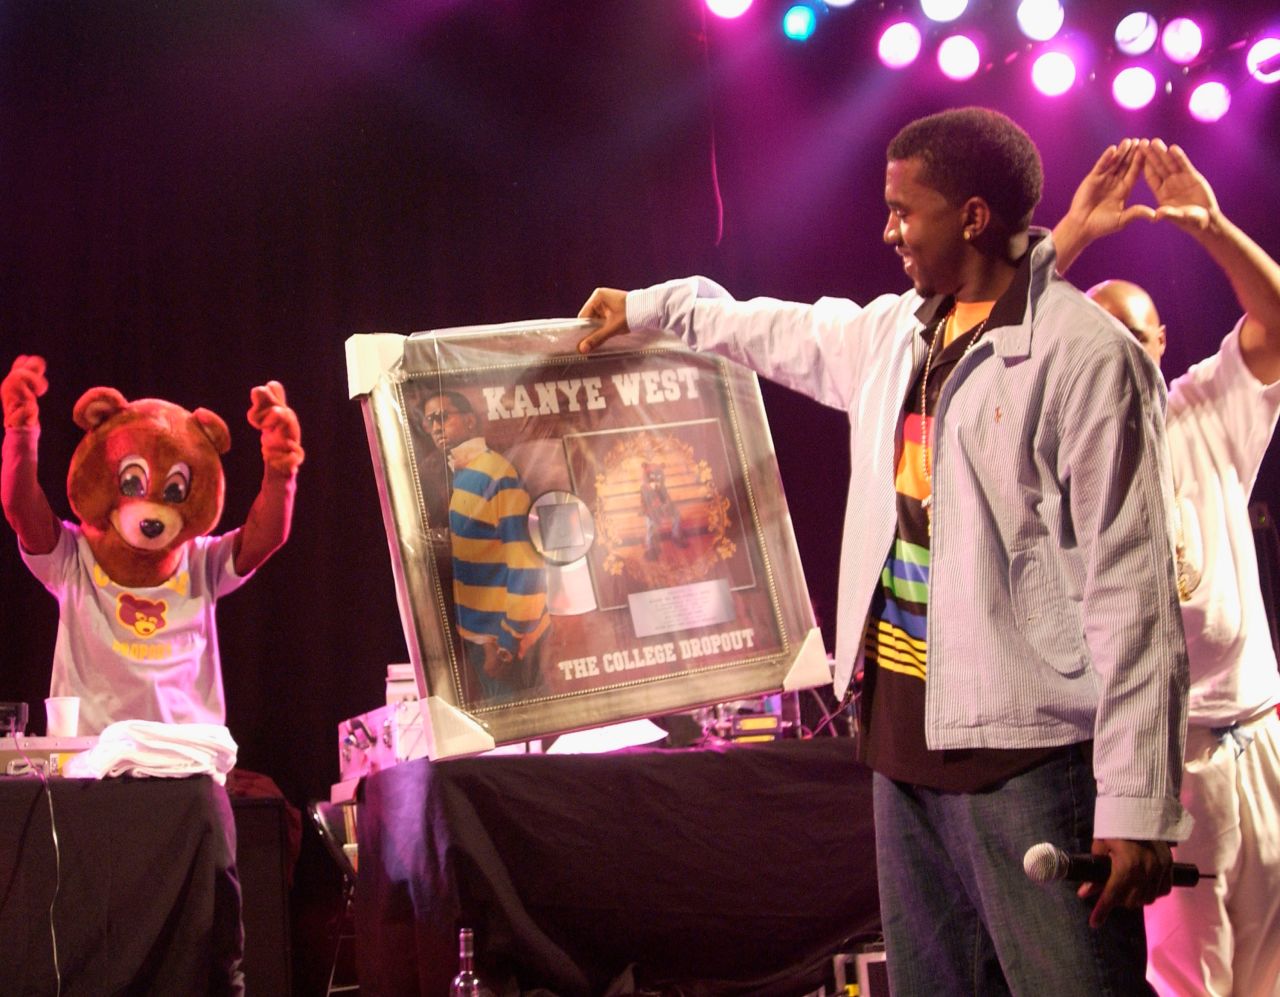 West is presented with his first platinum album for "The College Dropout" in 2004. The critically acclaimed album included hits such as "Through the Wire," "Jesus Walks" and "Slow Jamz." 